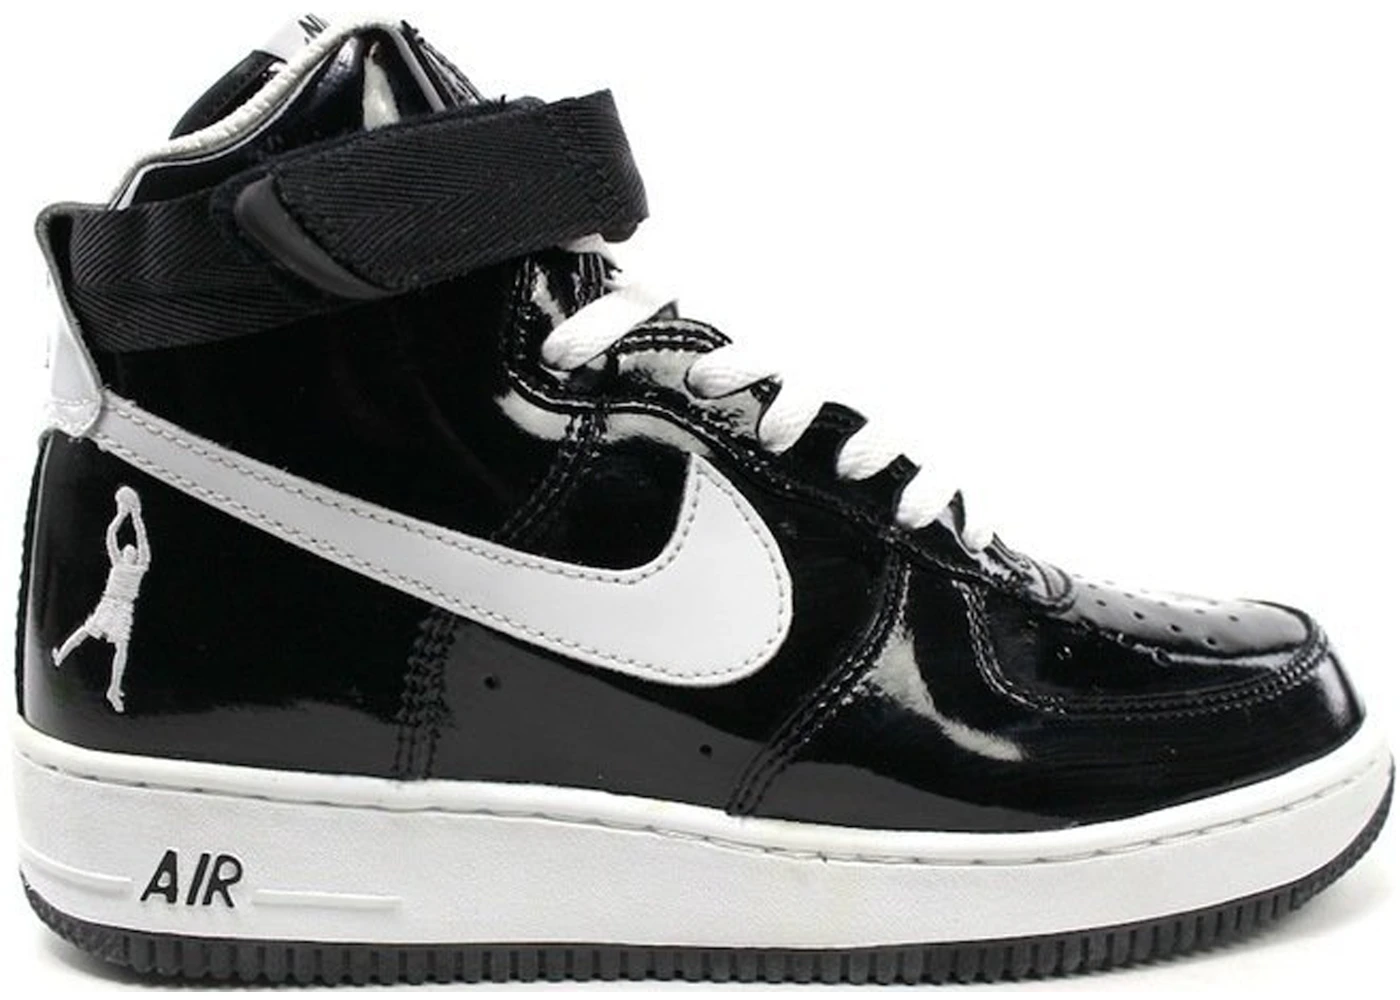 Nike Air Force 1 High Sheed Patent - US